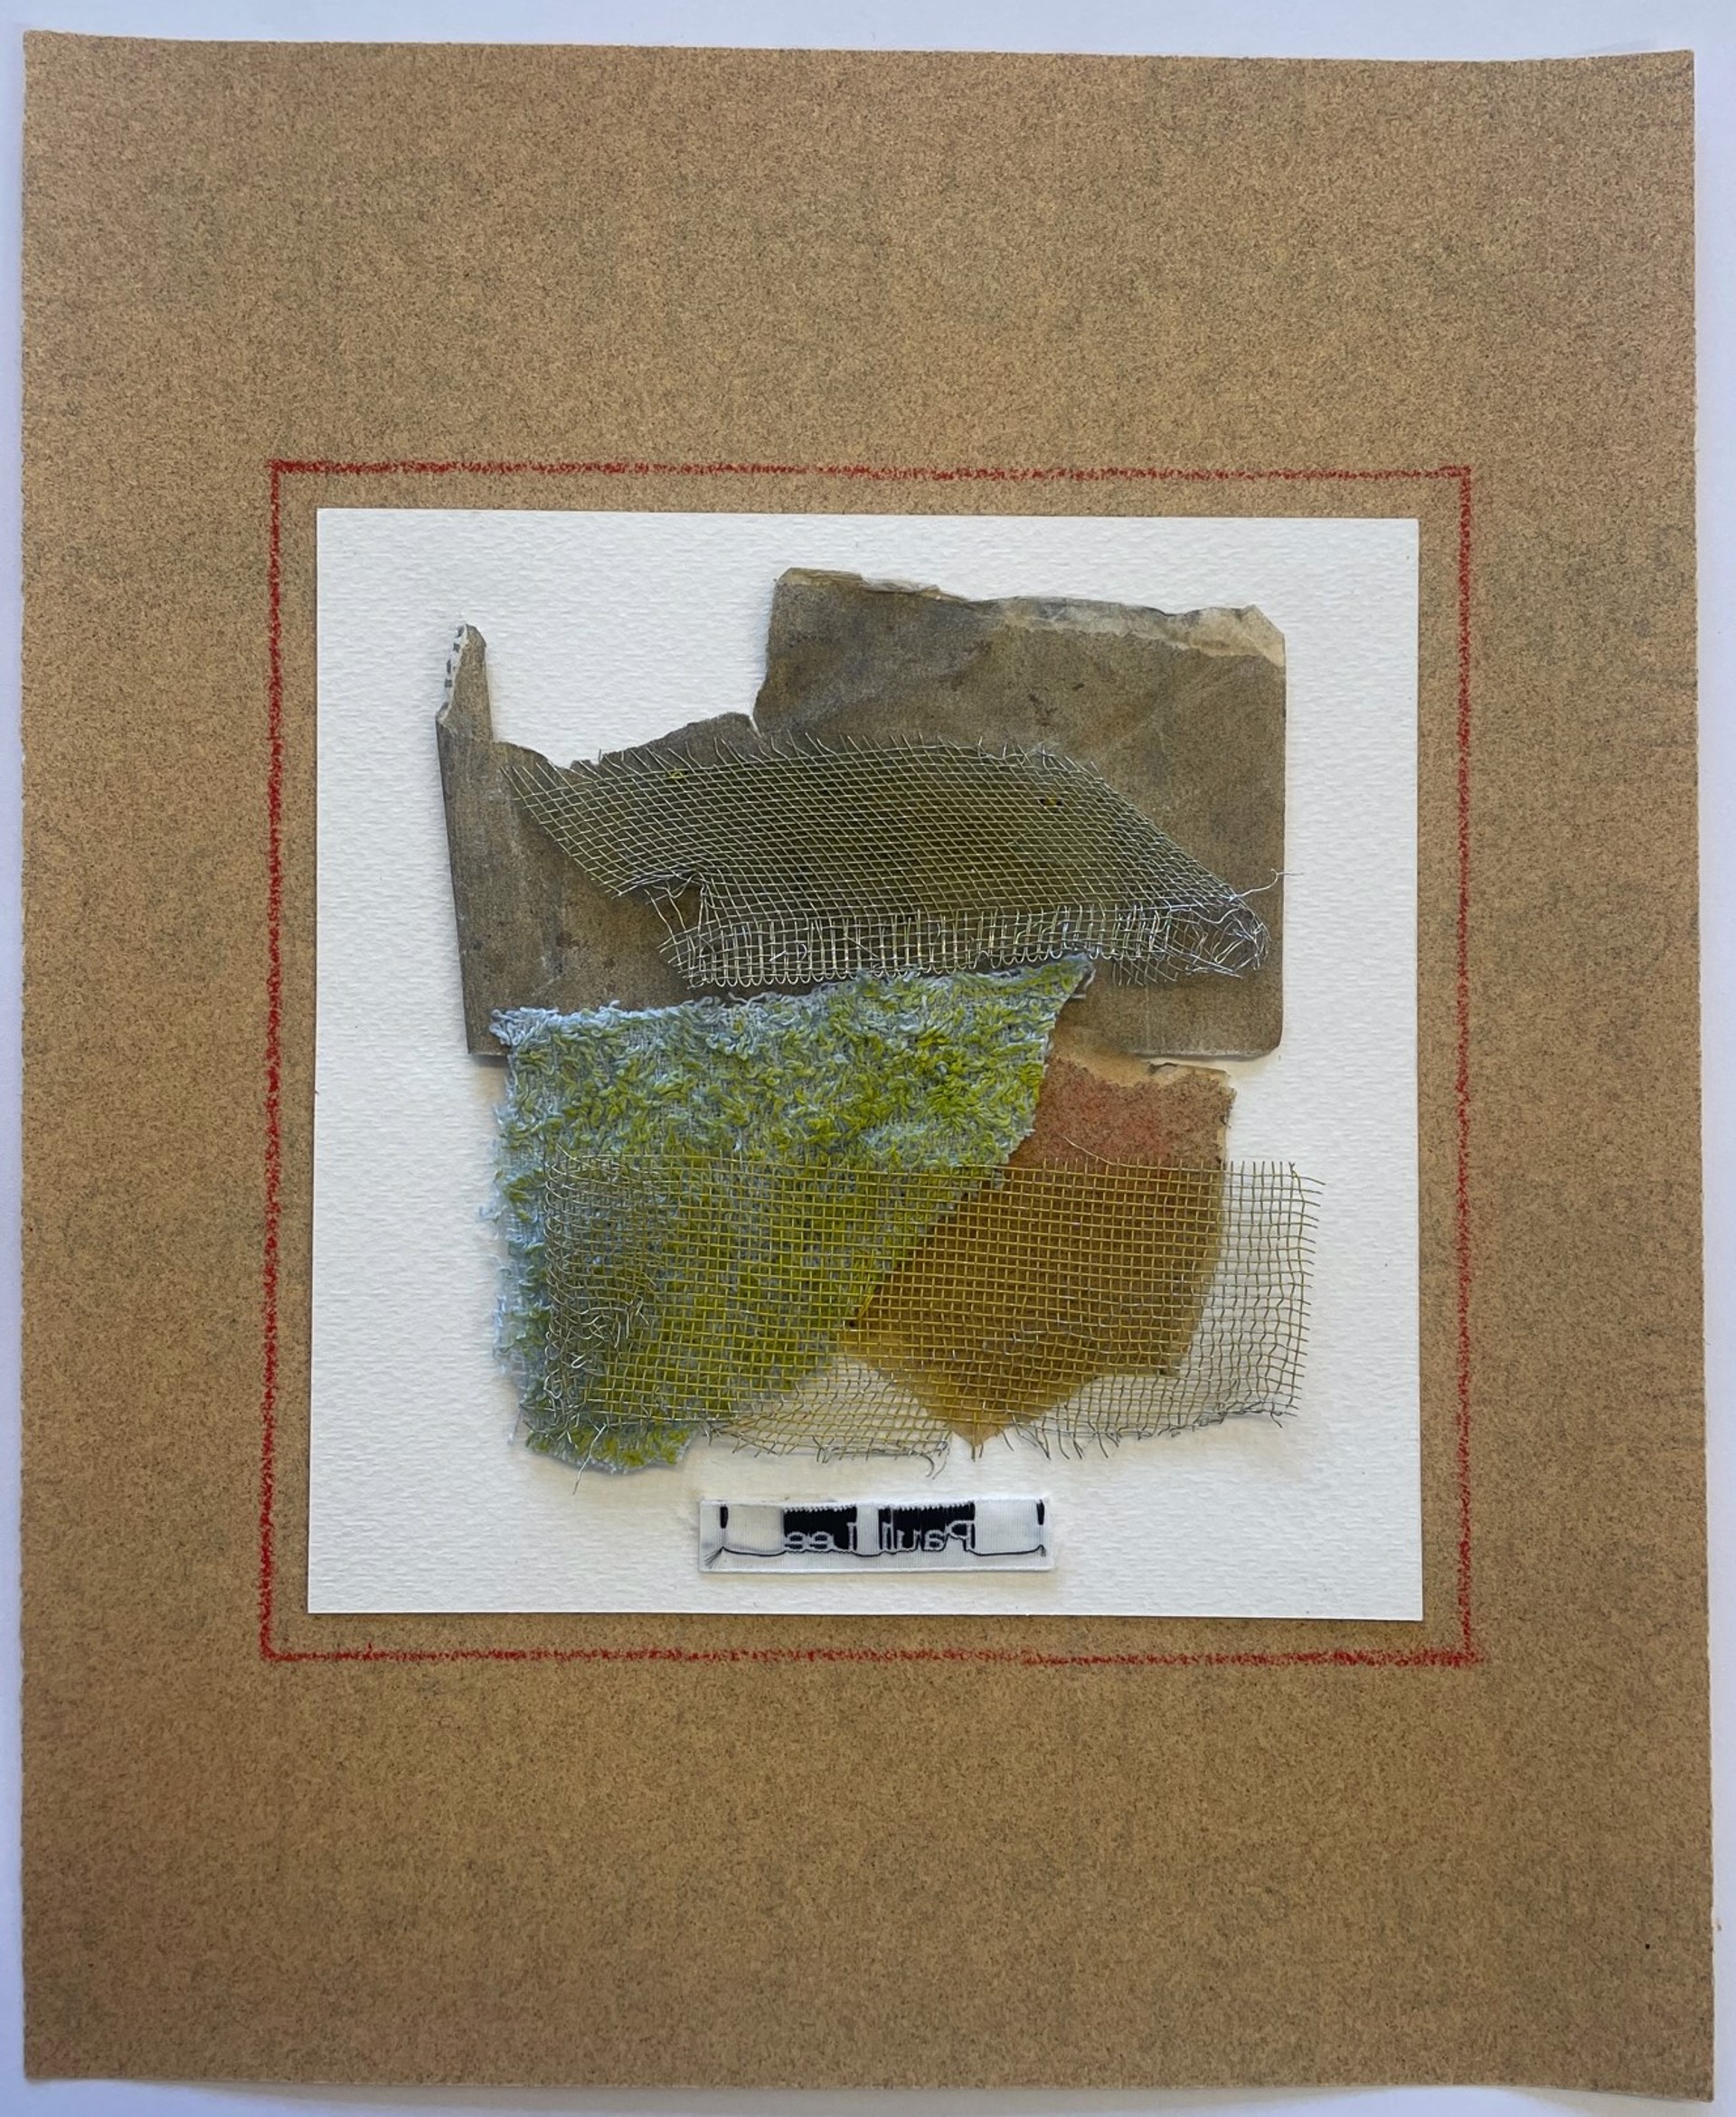 Sandpaper Collage No. 4 by Paul Lee